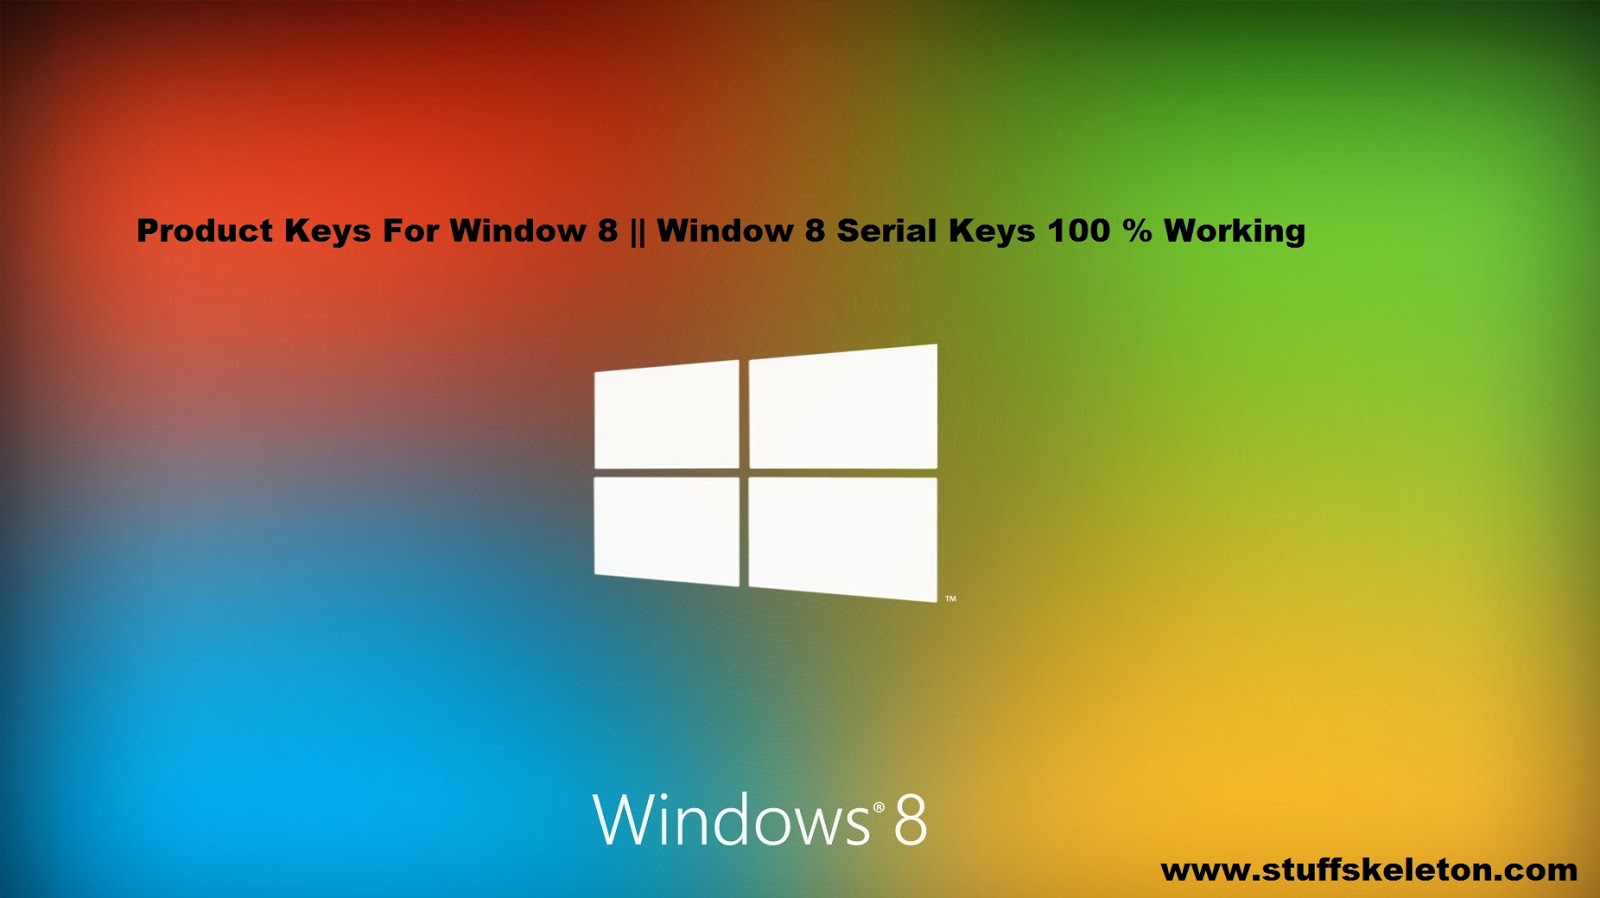 Product Keys For Windows Working Eight